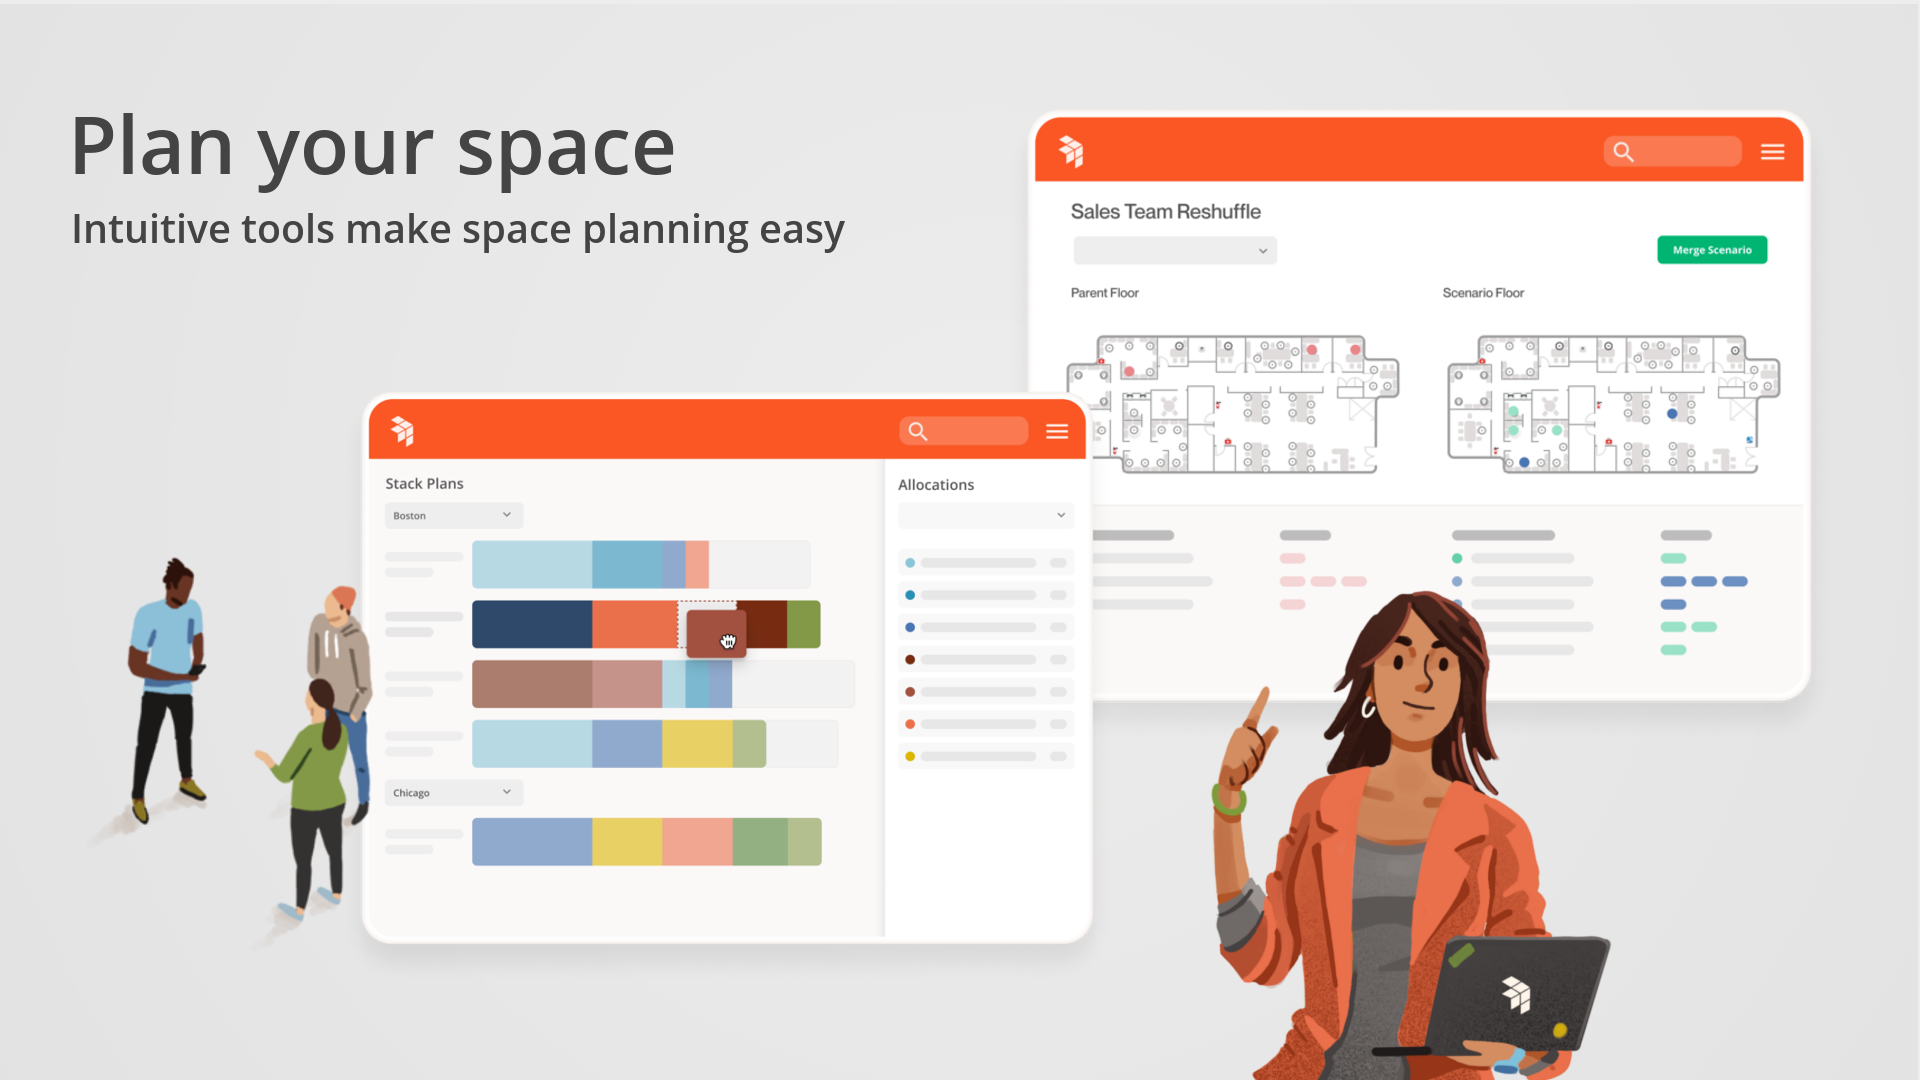 Get the tools and insights you need to plan for the dynamic workplace—Scenario Planning, Portfolio Reports, Stack Plans, and more.